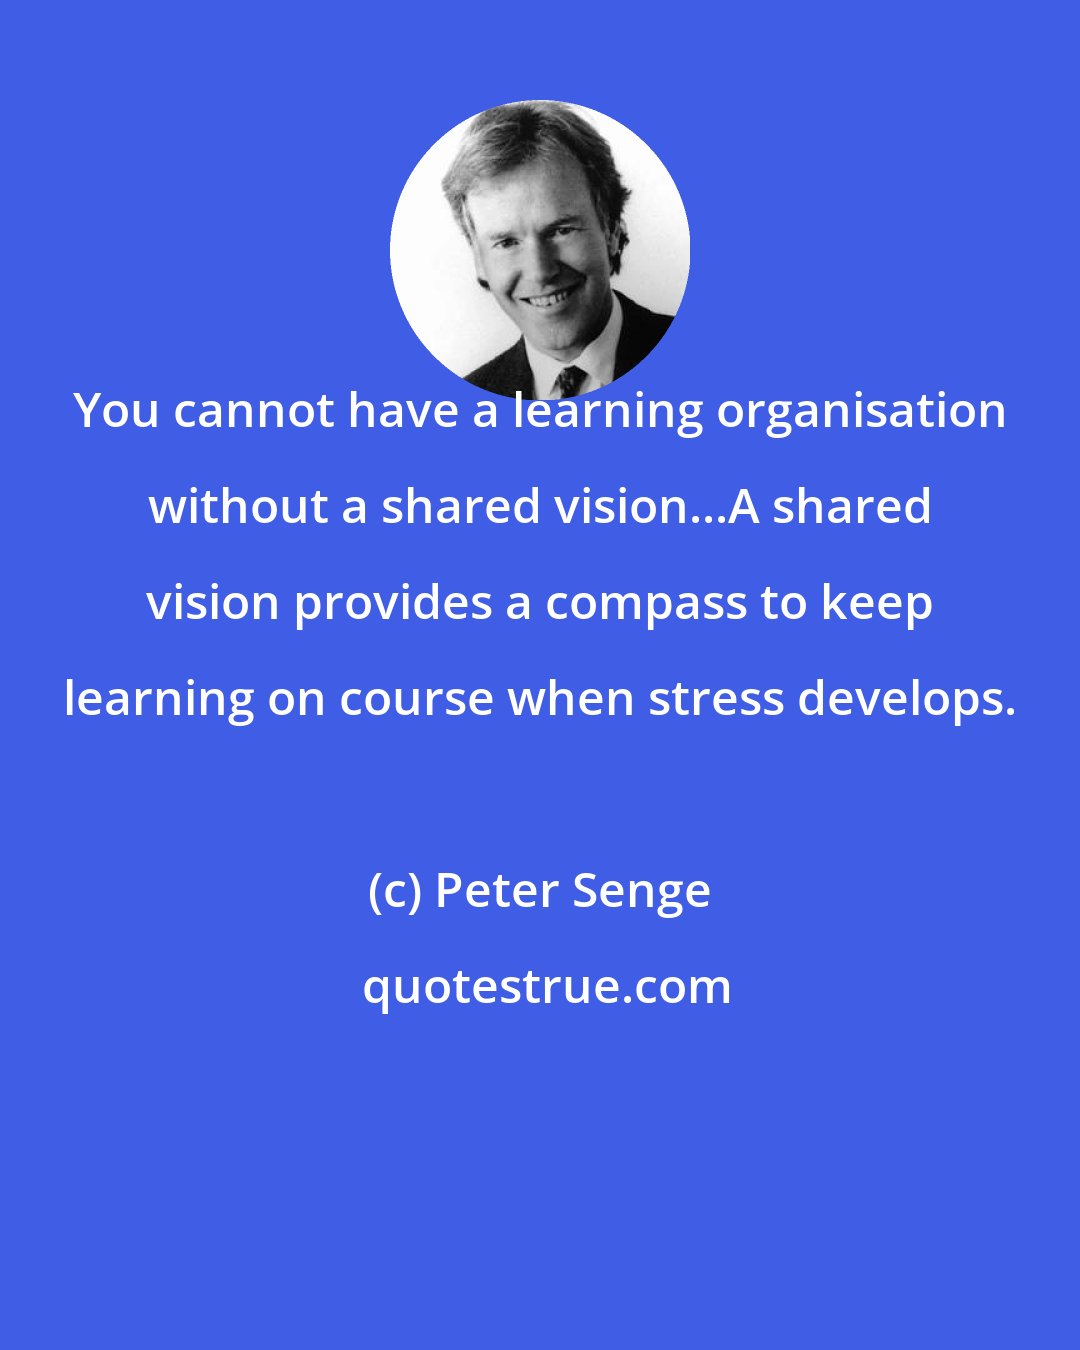 Peter Senge: You cannot have a learning organisation without a shared vision...A shared vision provides a compass to keep learning on course when stress develops.